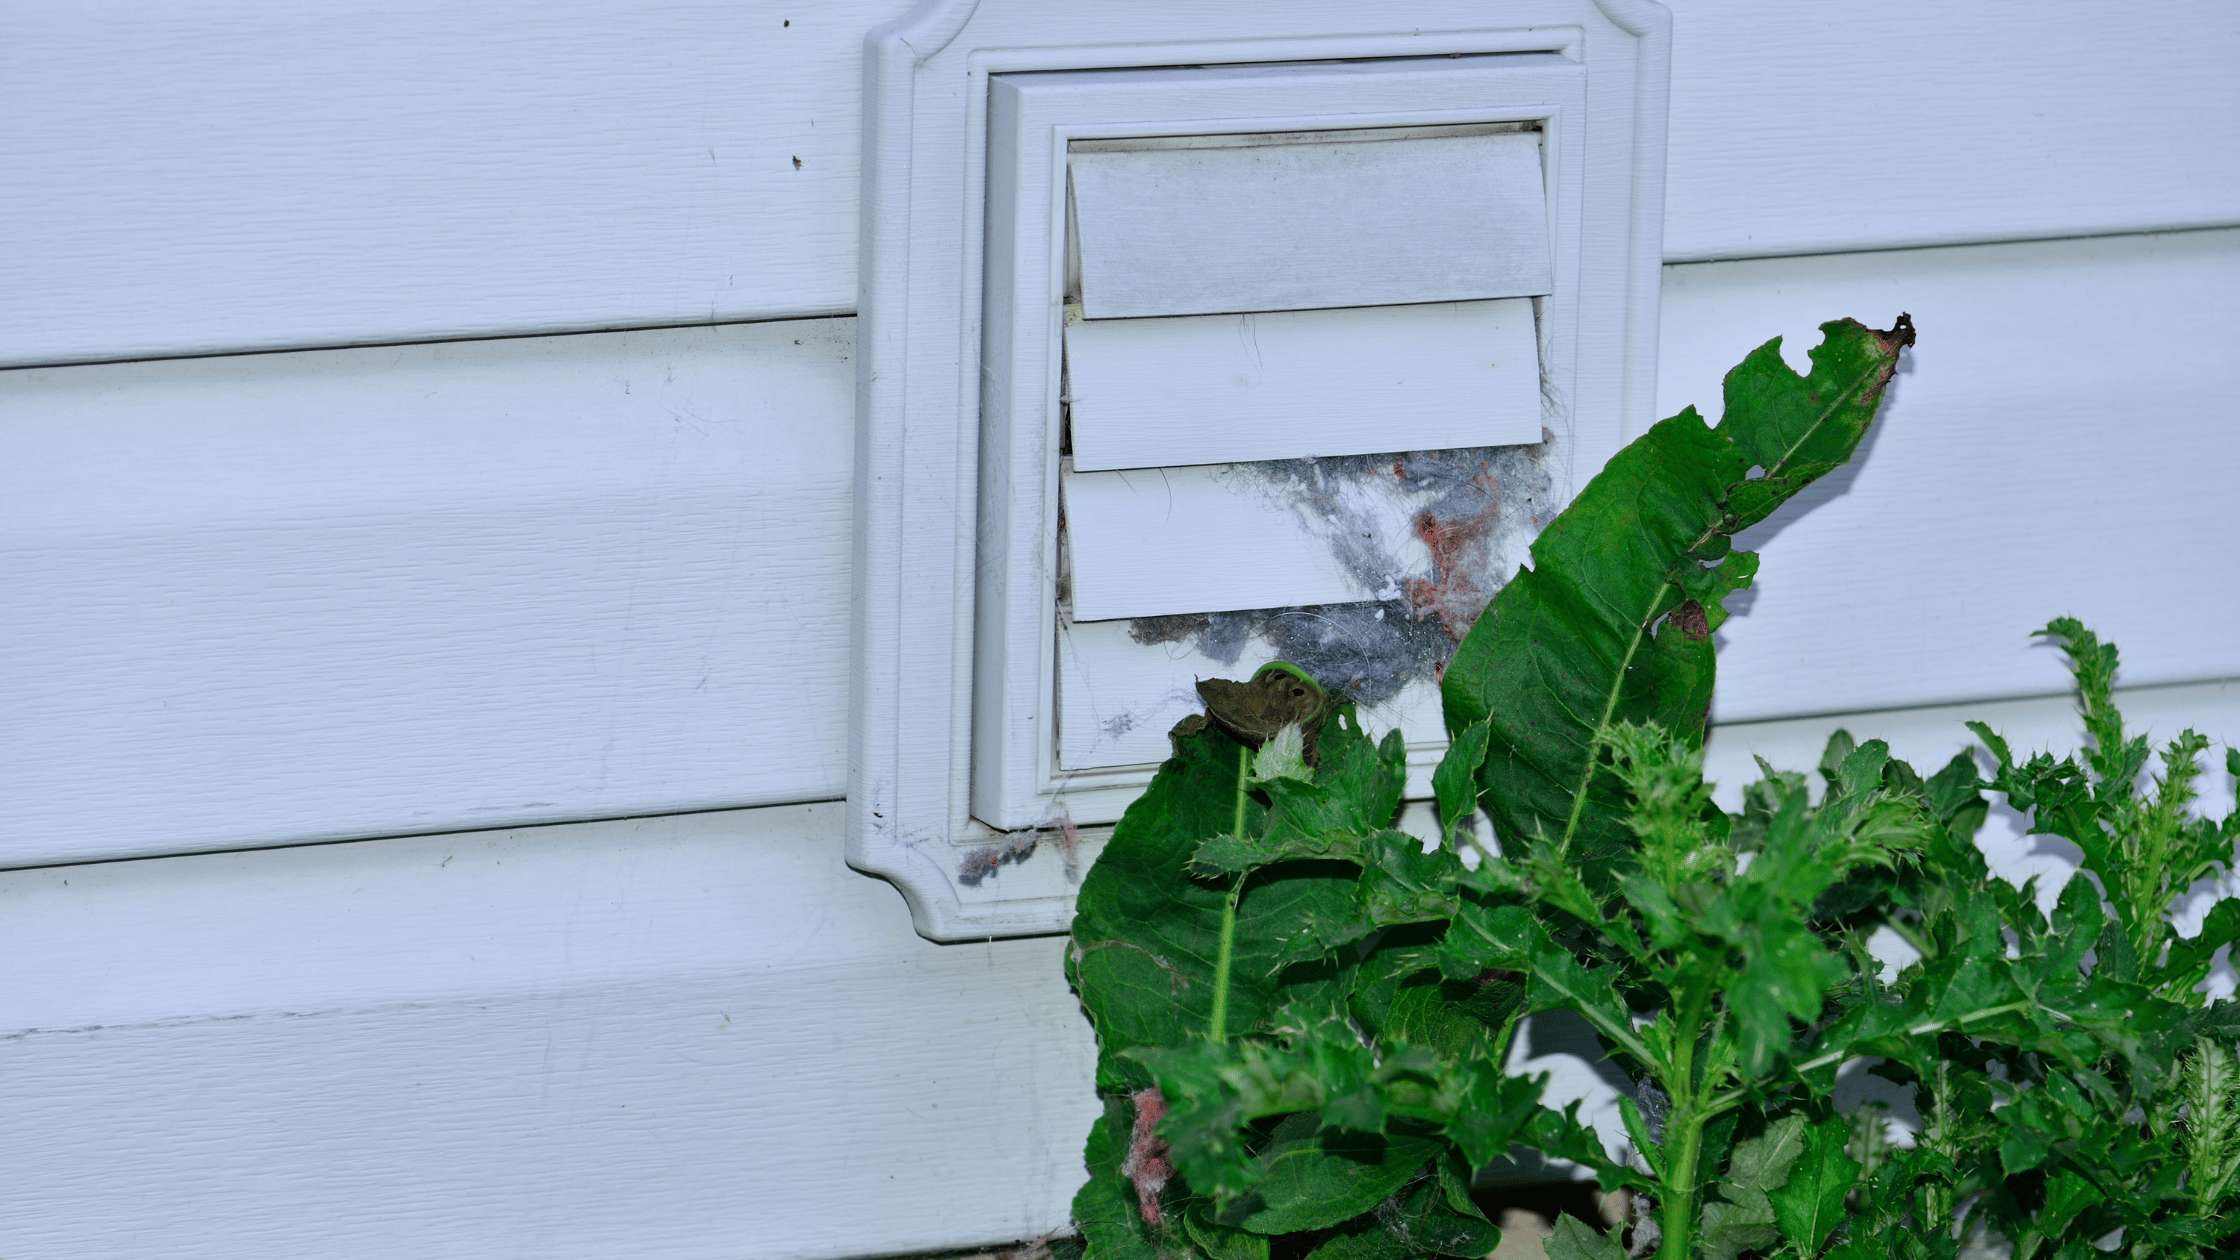 Dryer Vent Cleaning in the Summer